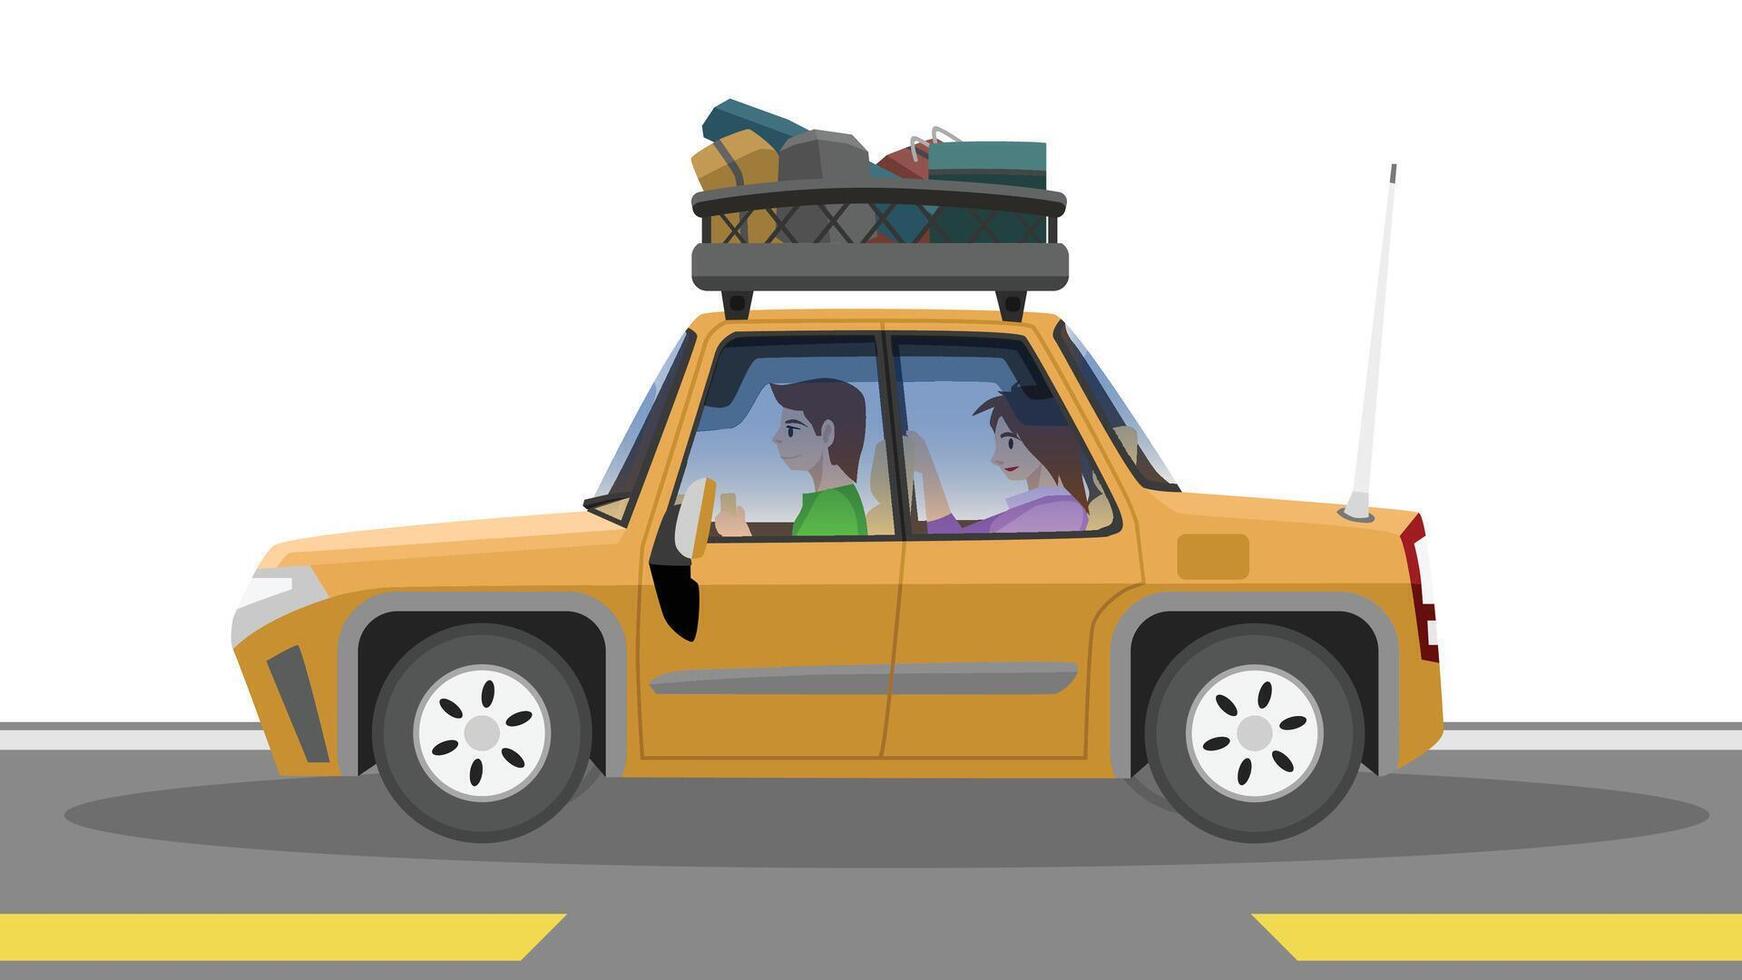 Obect vector or illustration of family trip on sedan car orange color. Driving on man with female passenger sit in the back. Cars have racks to carry luggage and other things for long distances.